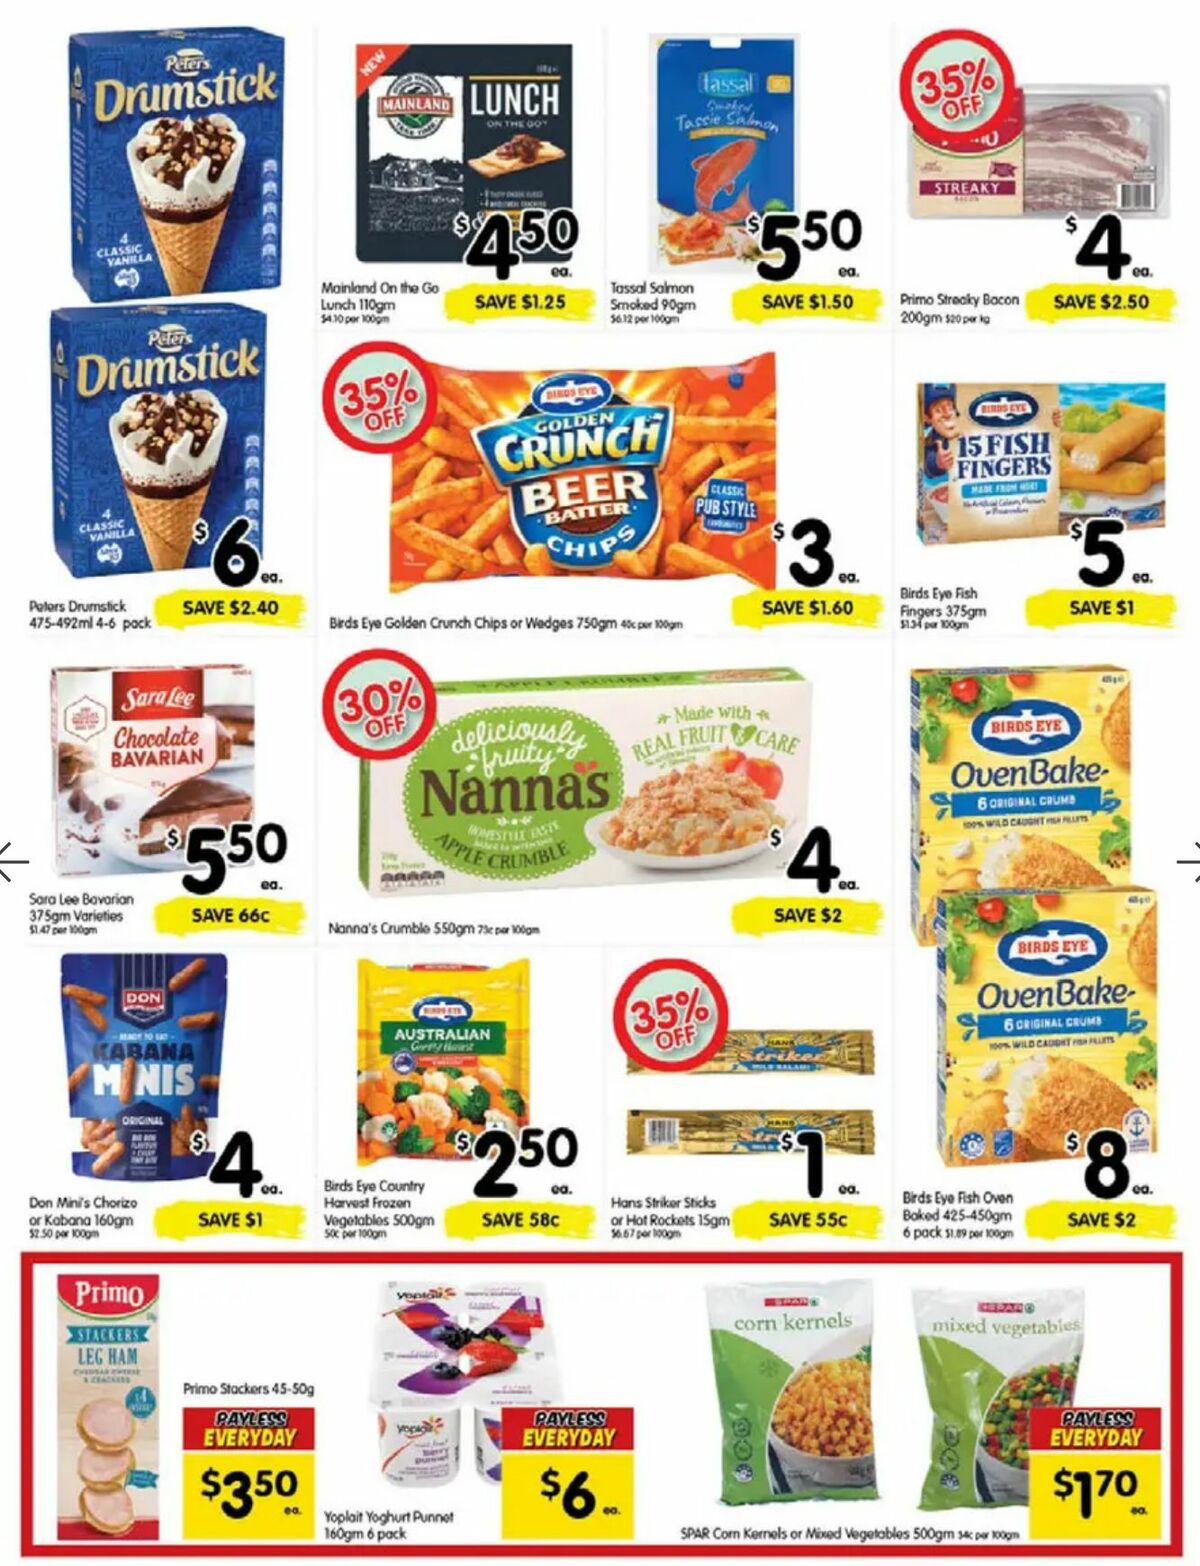 Spar Catalogues from 8 September